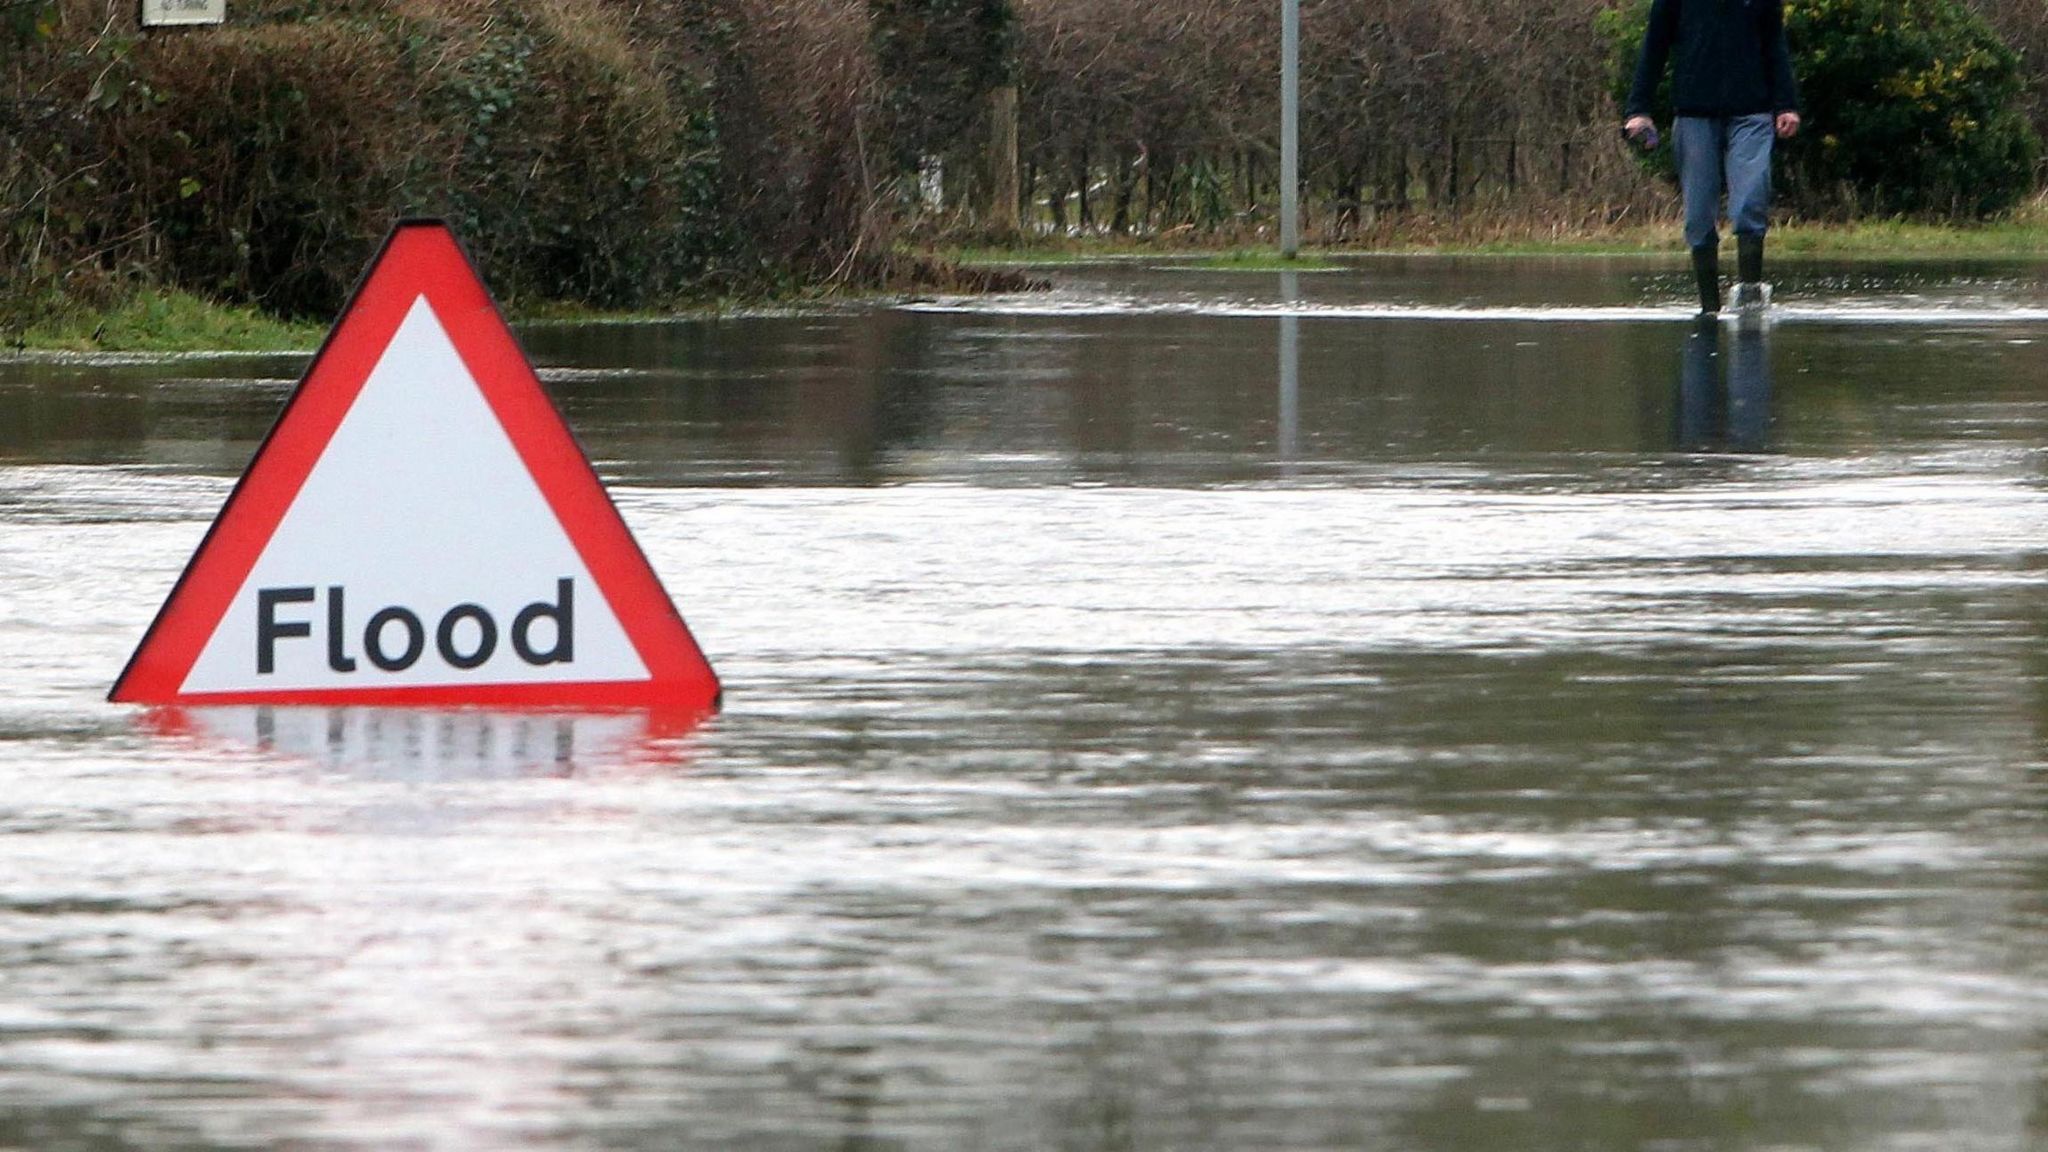 Flood alerts issued across east of England - BBC News